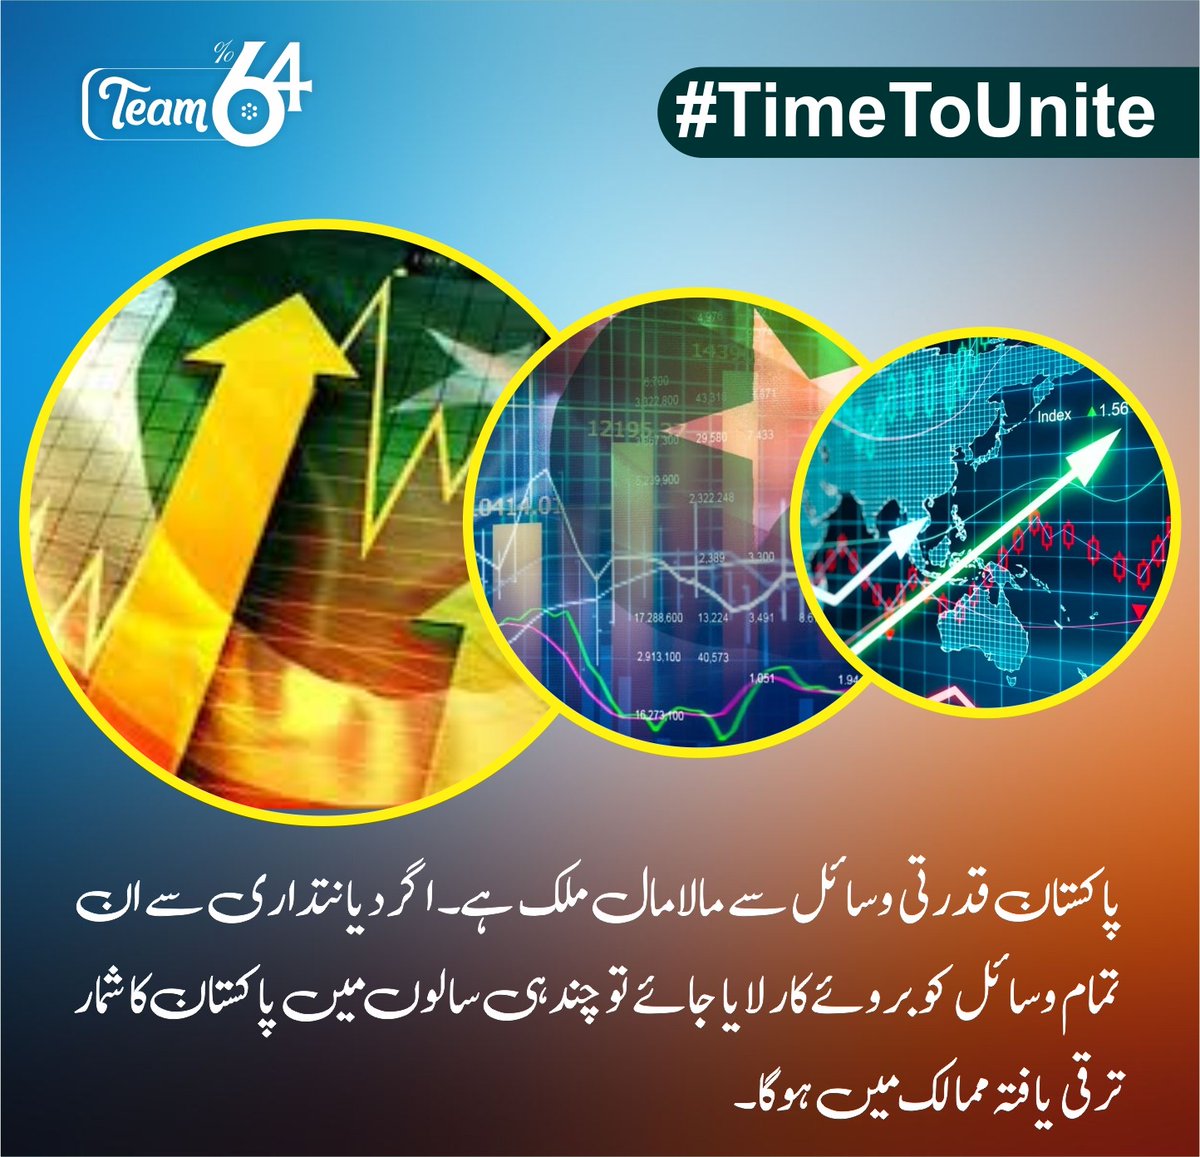 In a world full of division, it's #TimeToUnite and come together as one. Let's put aside our differences and work towards a brighter future for all.